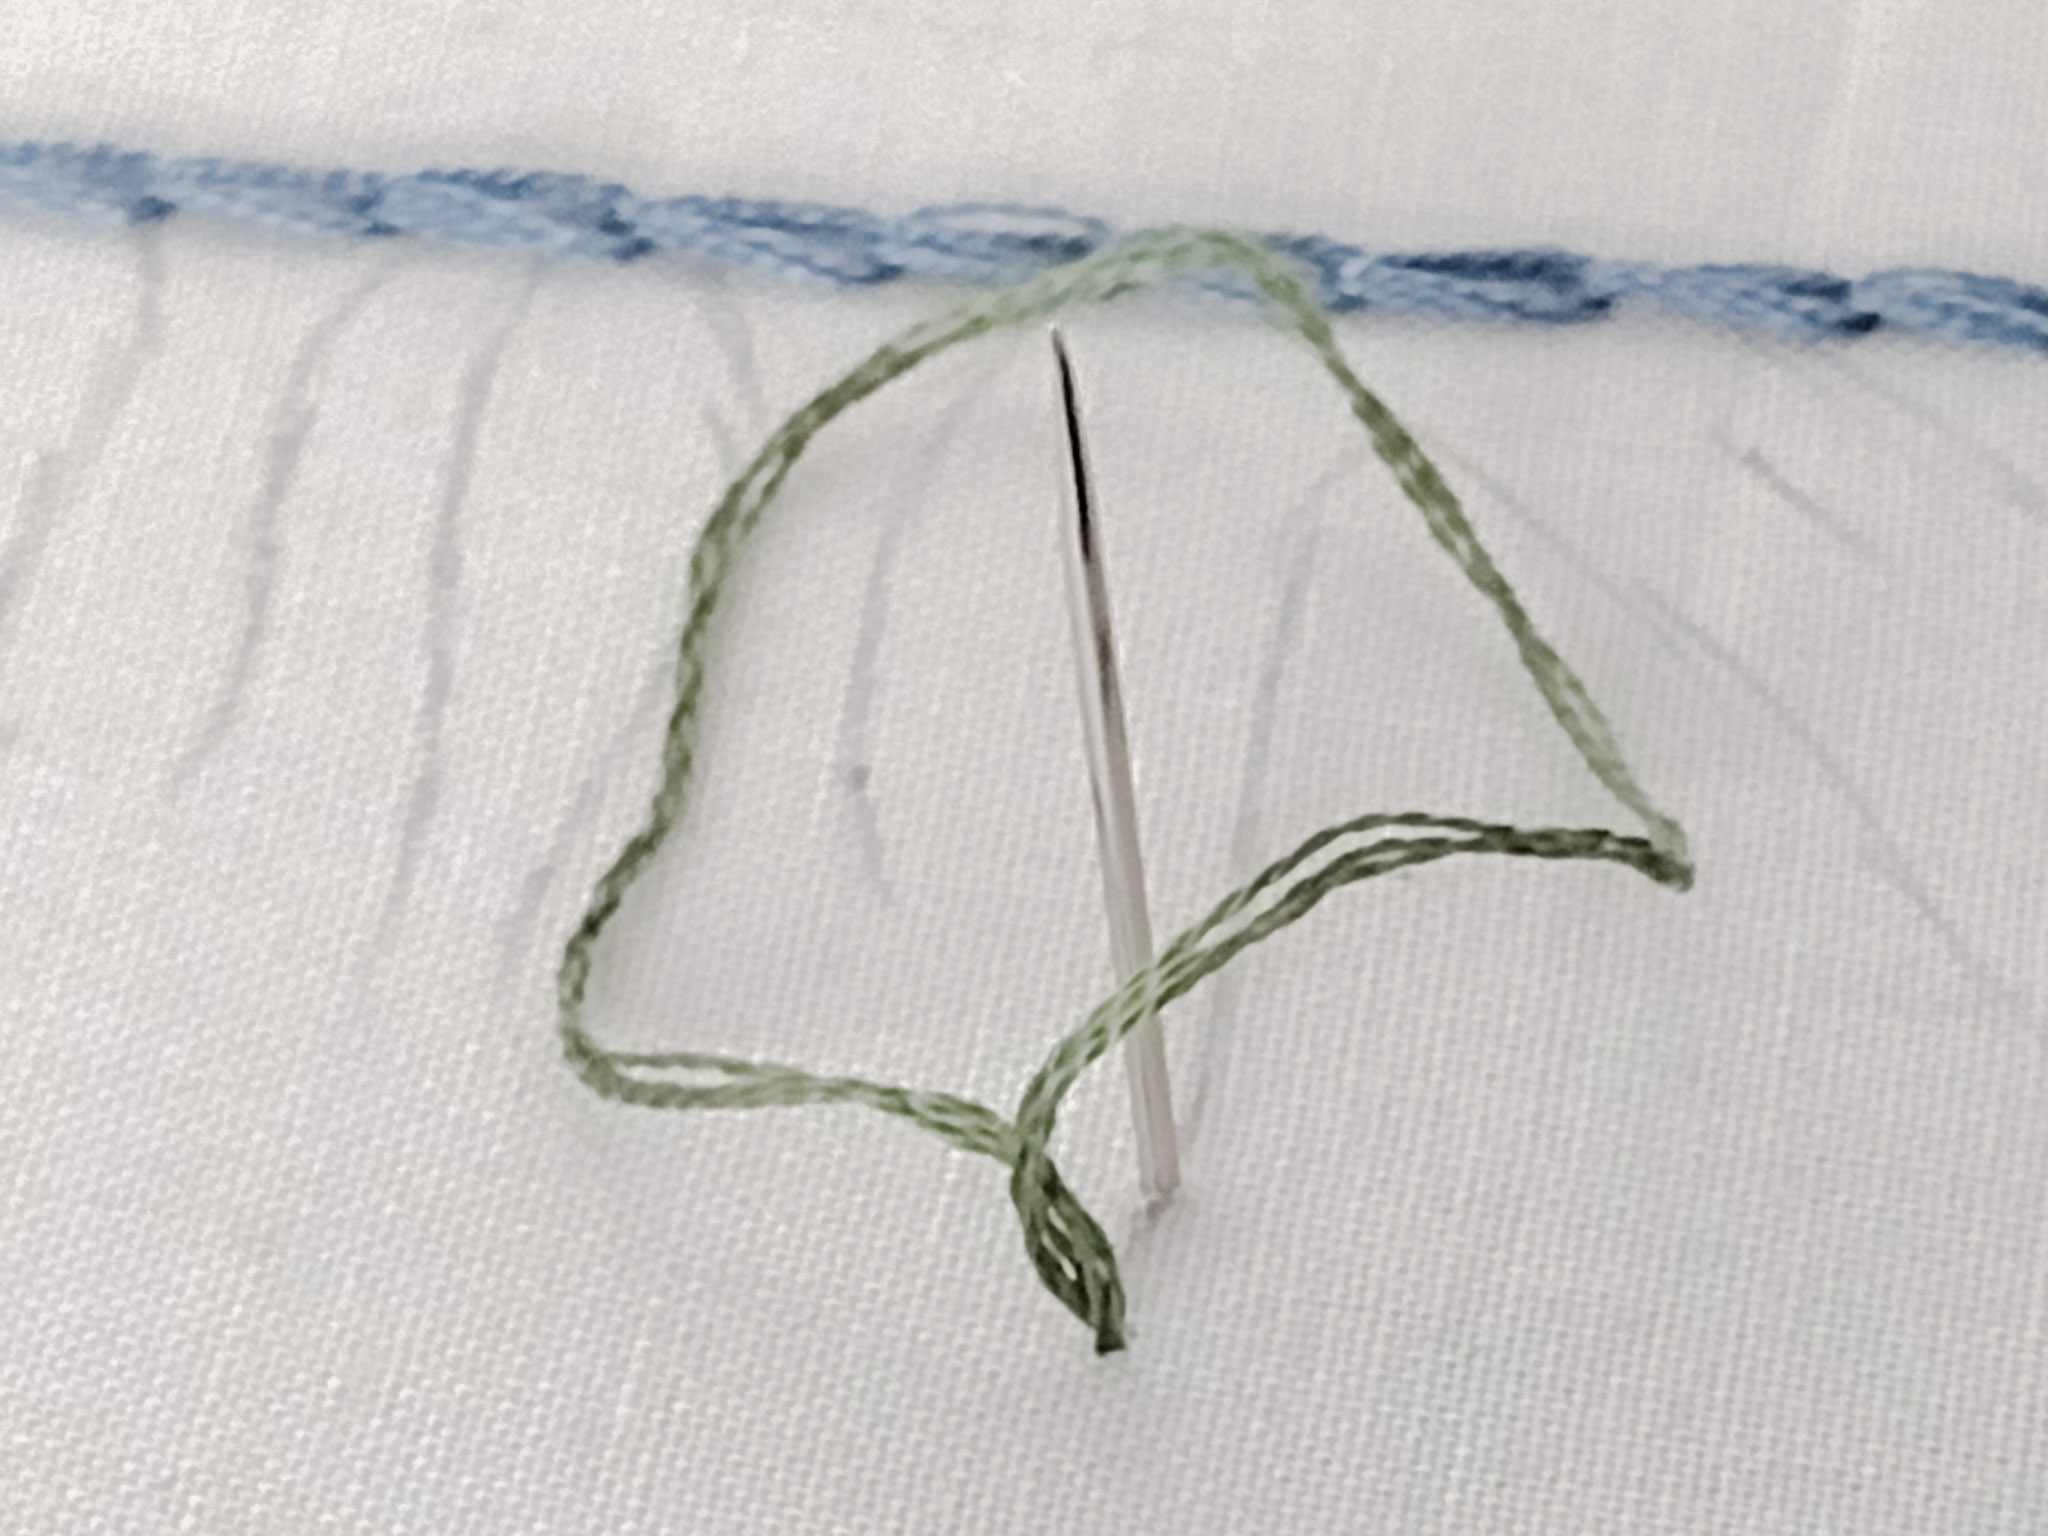 twist embroidery floss loop around a needle poking up